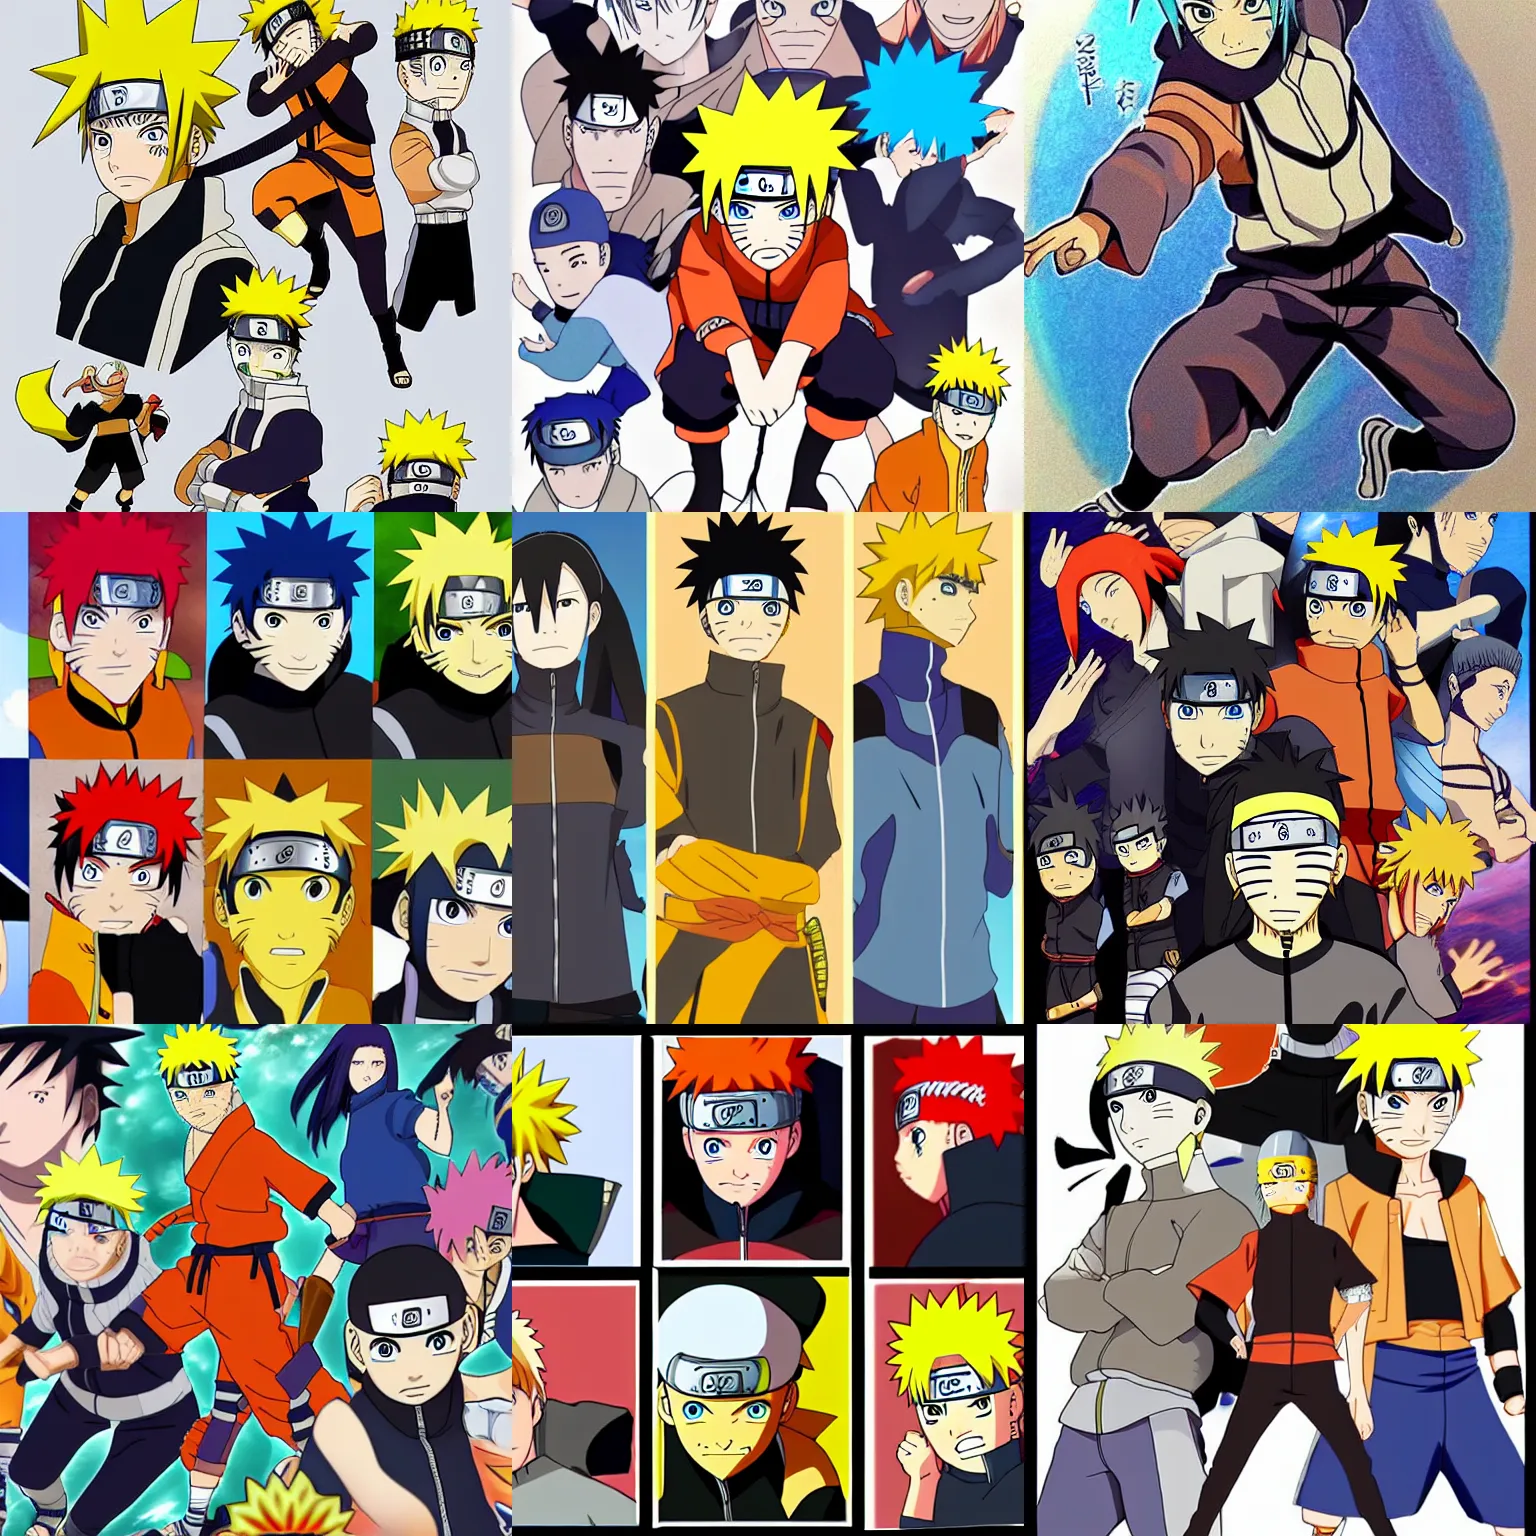 Prompt: naruto drawn in the style of avatar the last airbender, cartoon drawing